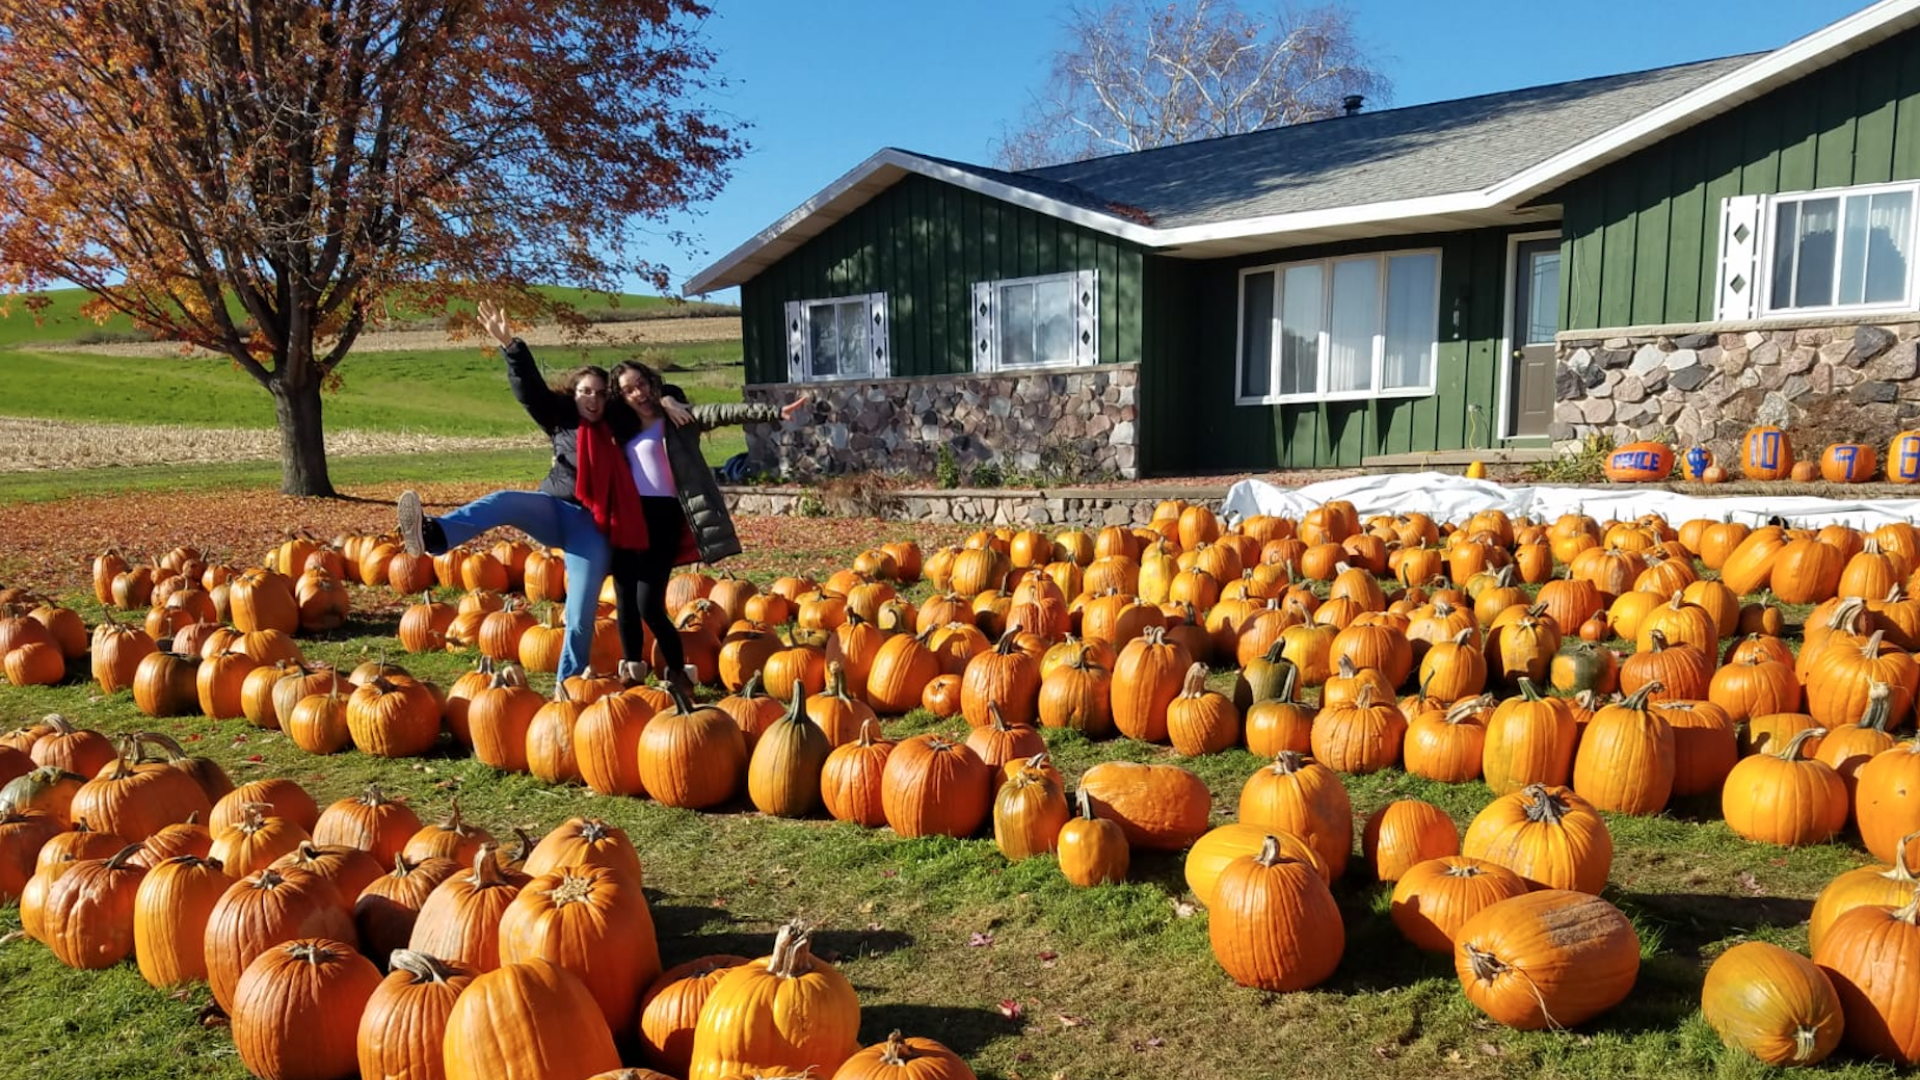 Me and my friend have our arms around each other and wave our hands in joy at the path of pumpkins cleared up for us.